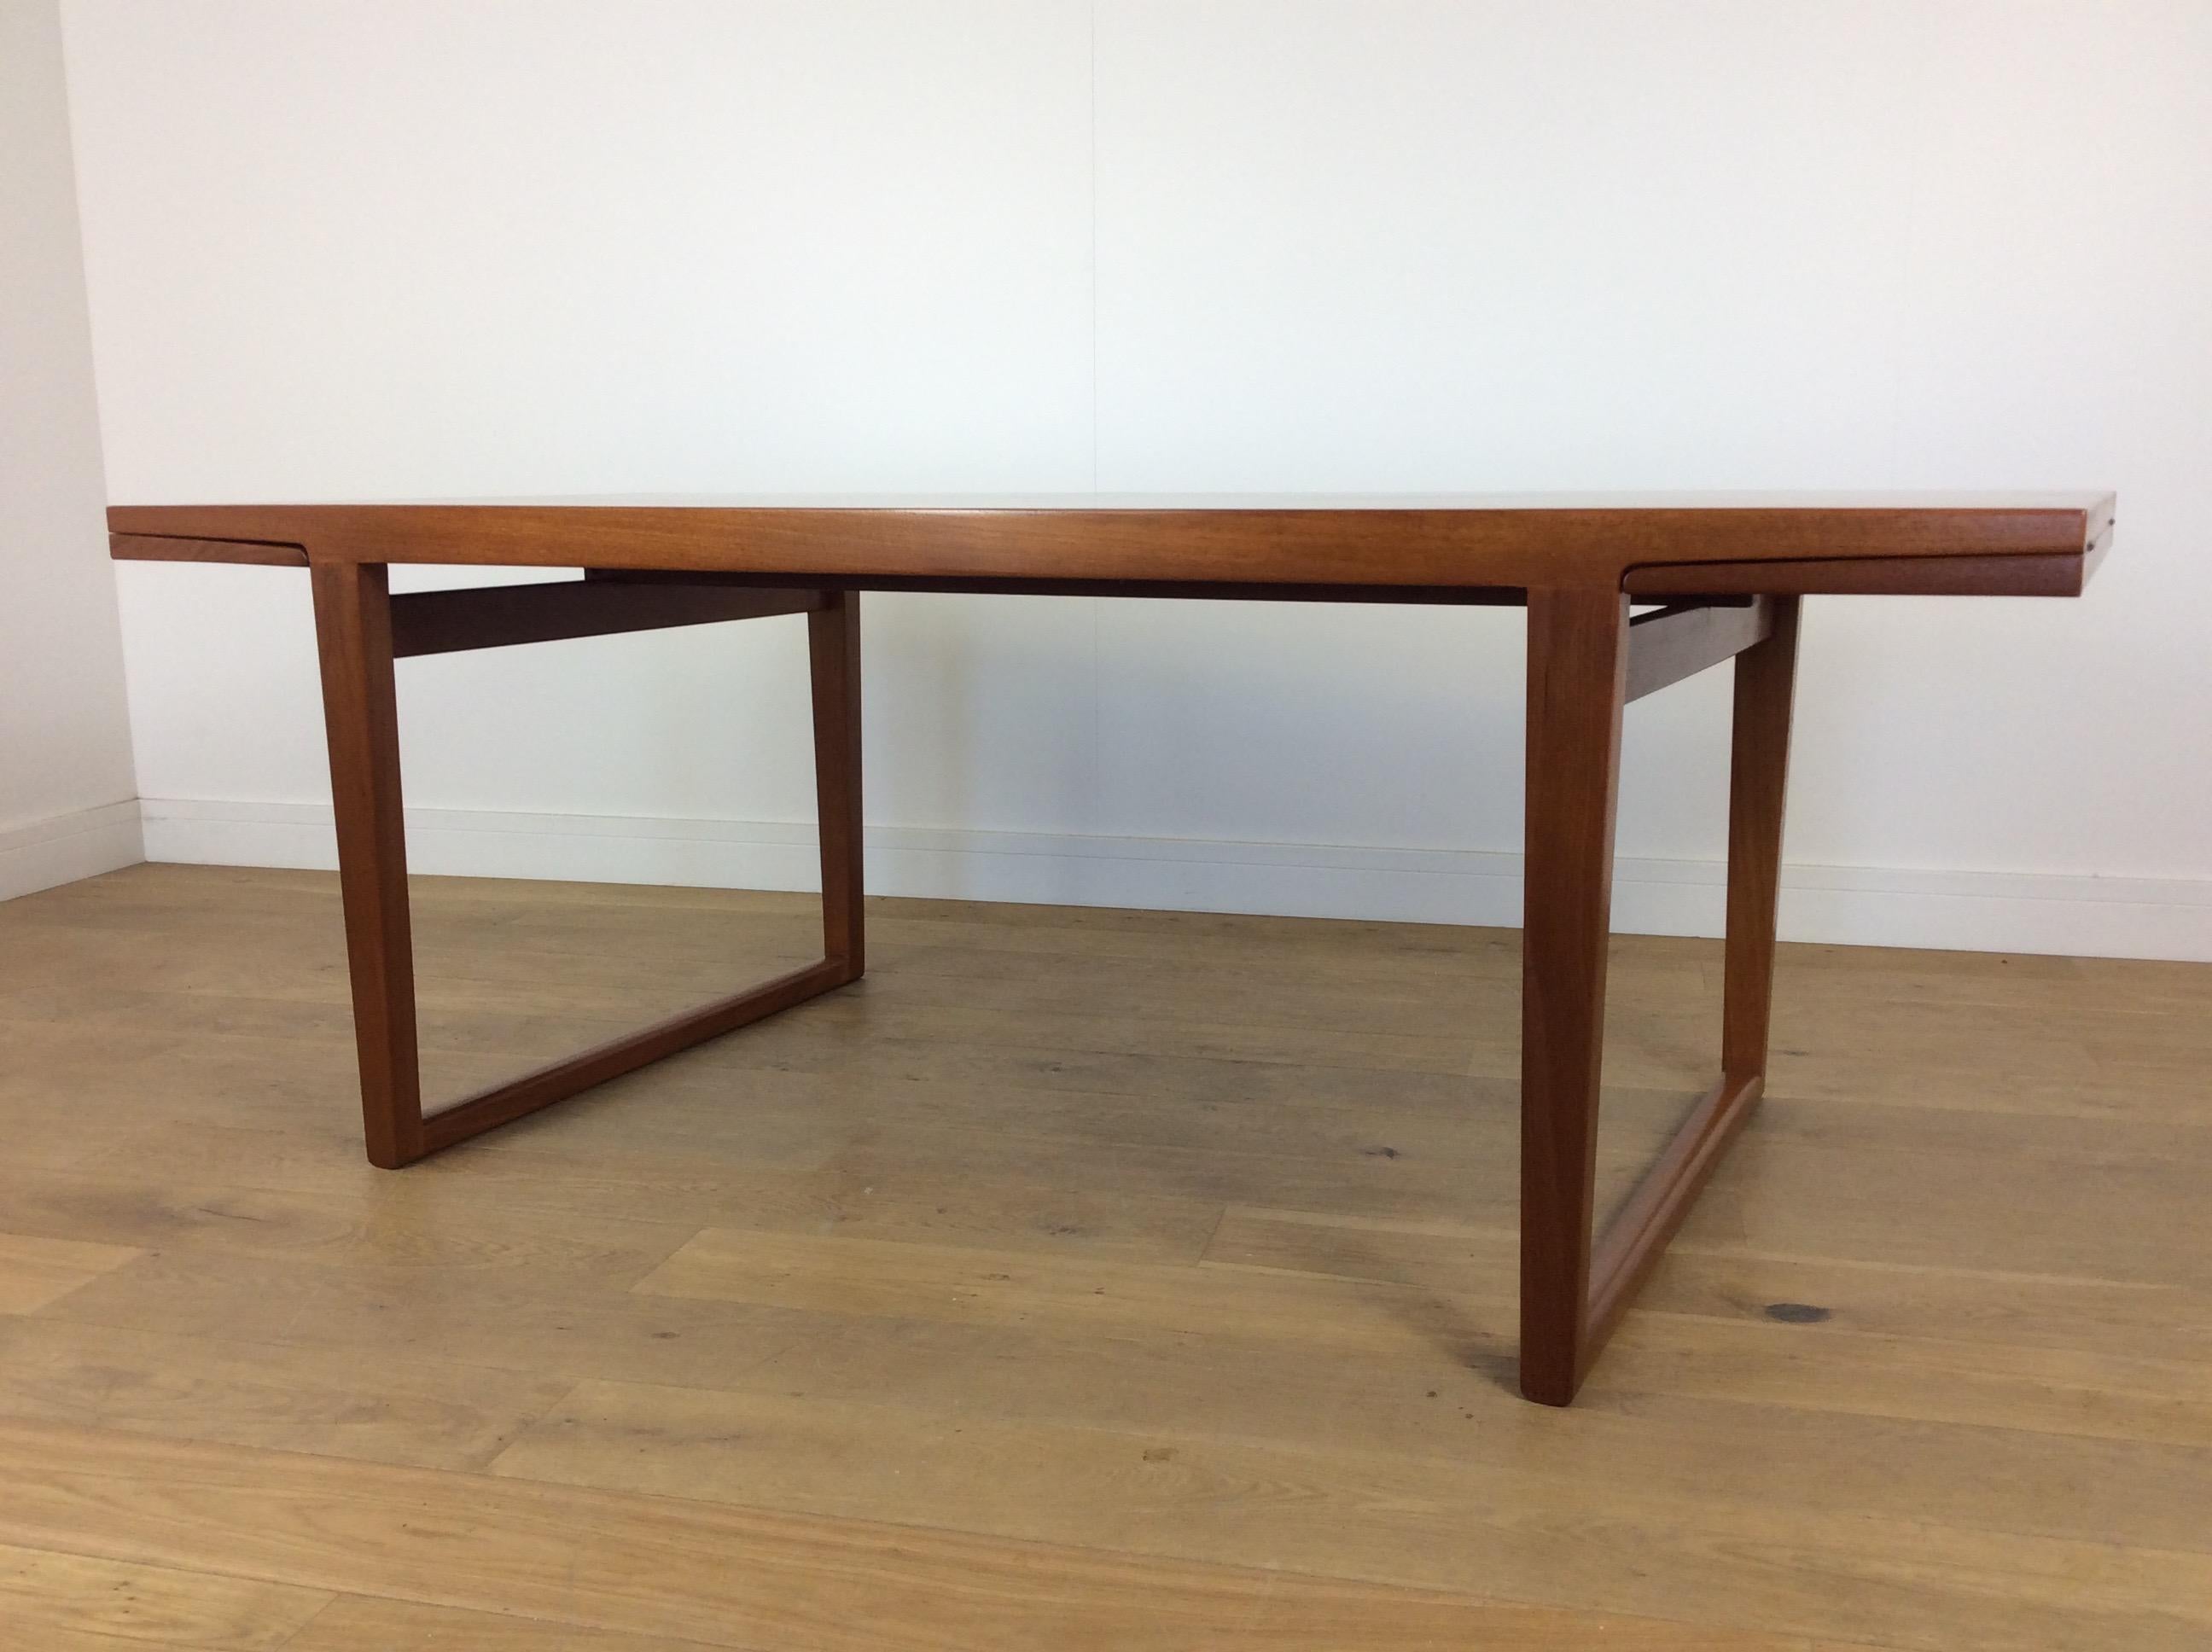 Midcentury extendable dining table.
Beautiful Swedish Mid-Century Modern design, teak dining table with pull-out leaves at either end.
Measures: 71 cm H, 195 cm W, 90 cm D each leaf offers an extra 30 cm
Scandinavia, circa 1960.